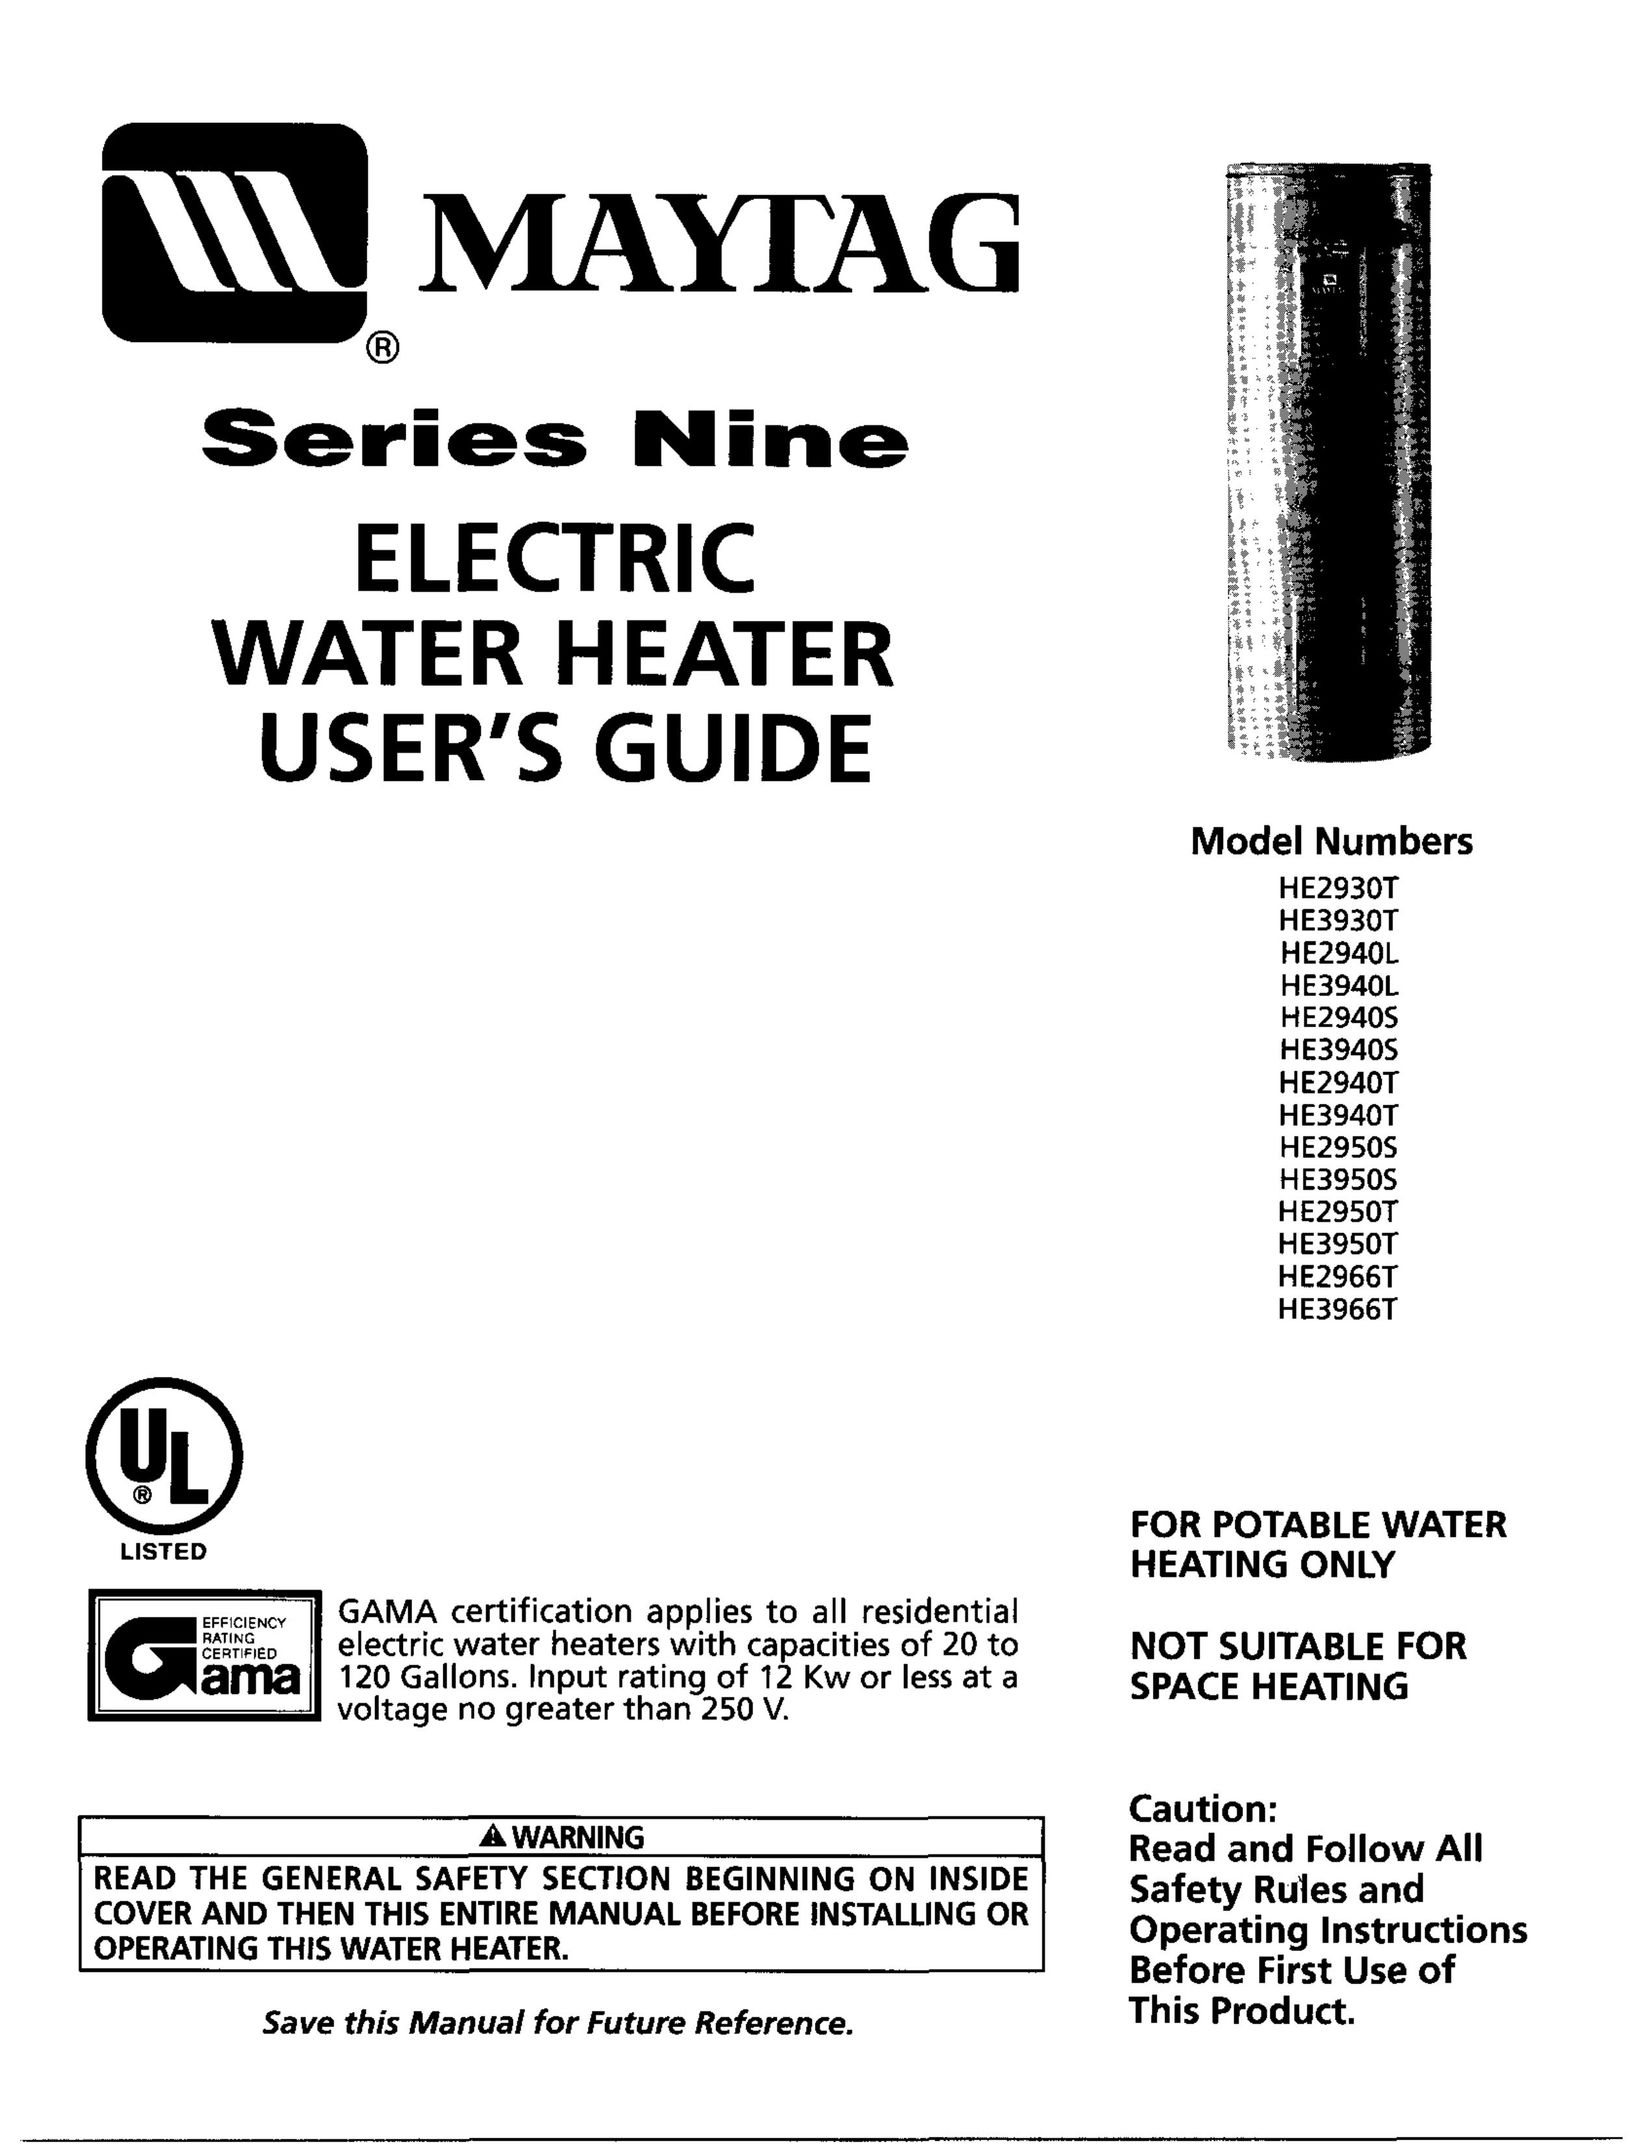 Maytag HE2950S Water Heater User Manual